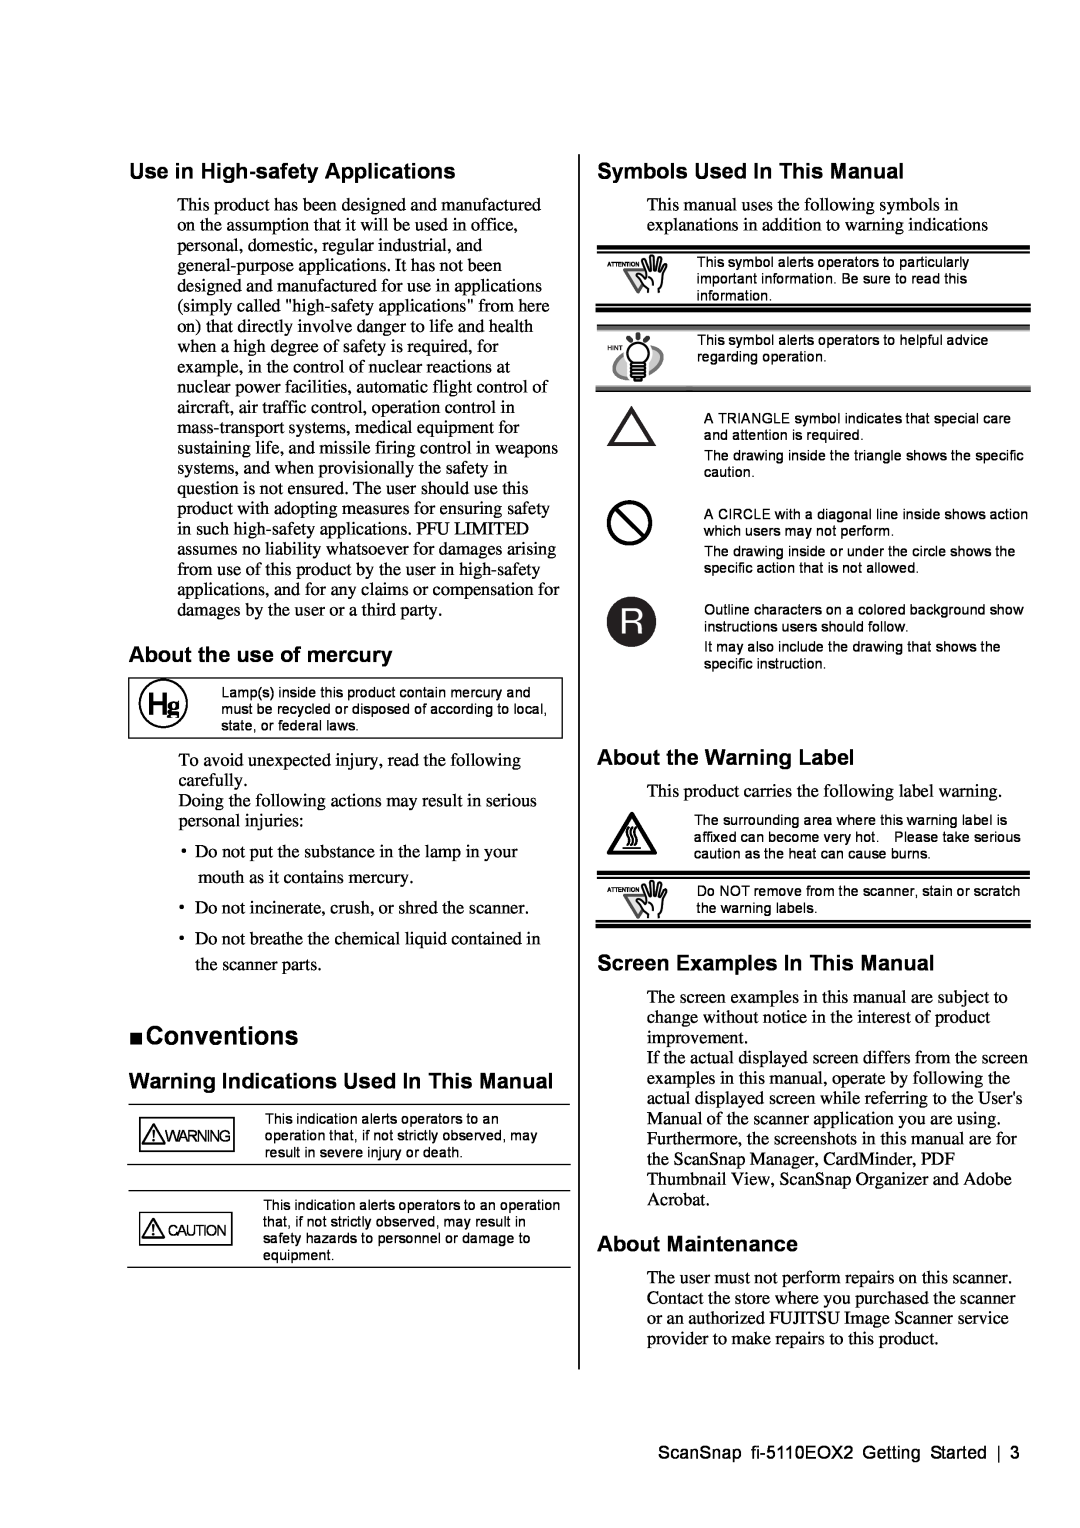 Fujitsu fi-5110EOX2 „ Conventions, Use in High-safety Applications, Symbols Used In This Manual, About the use of mercury 